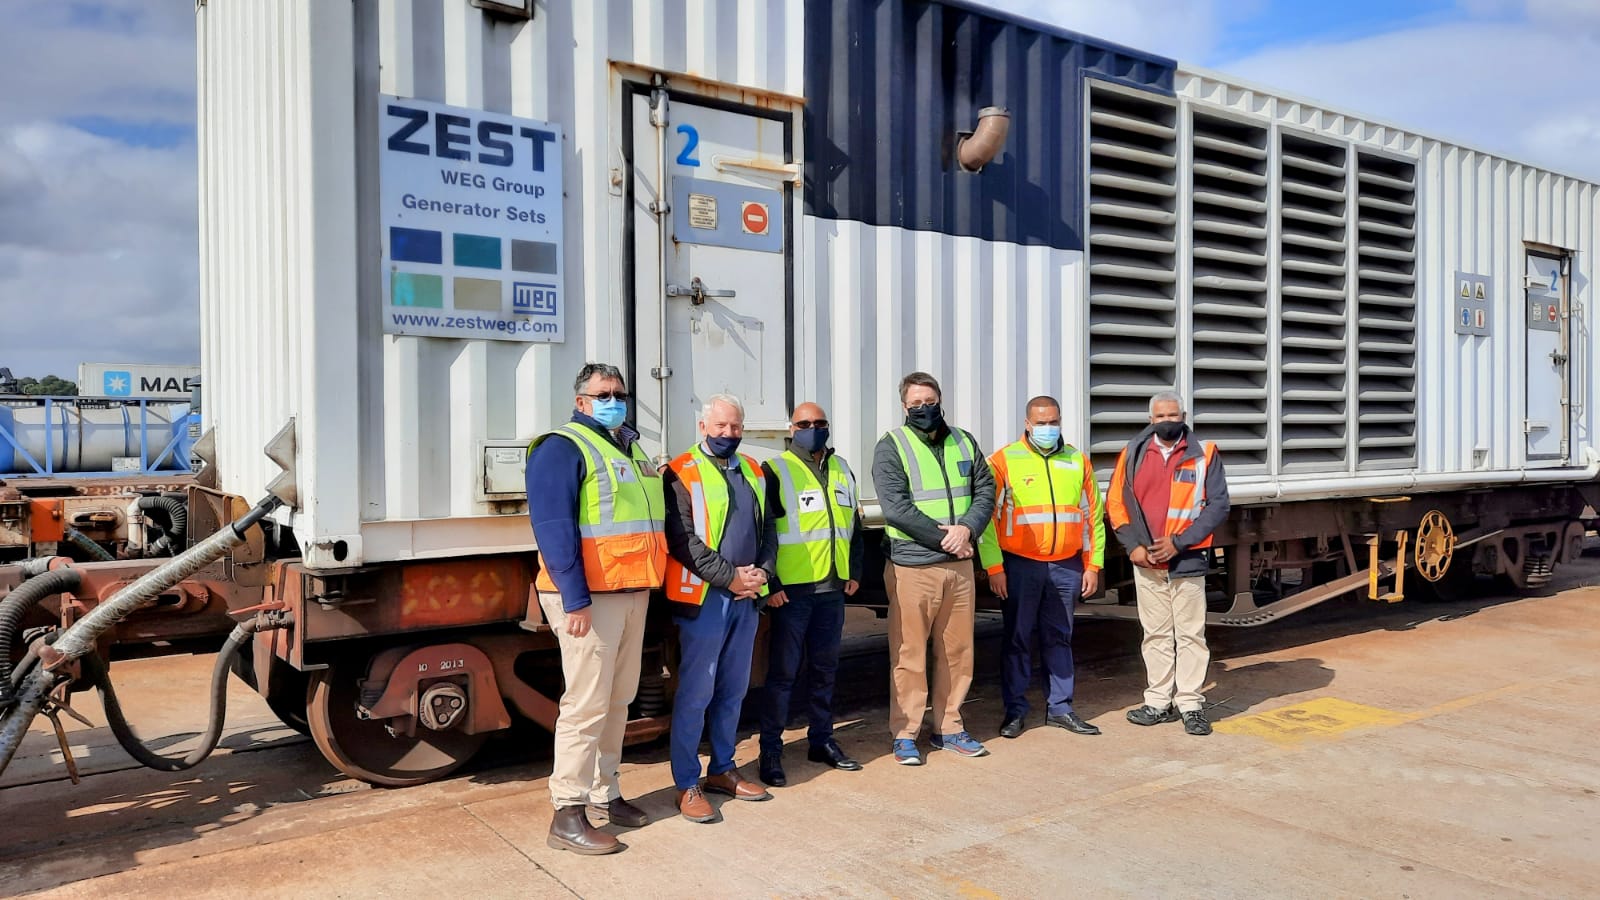 Premier Alan Winde and Minister David Maynier visit Belcon Terminal